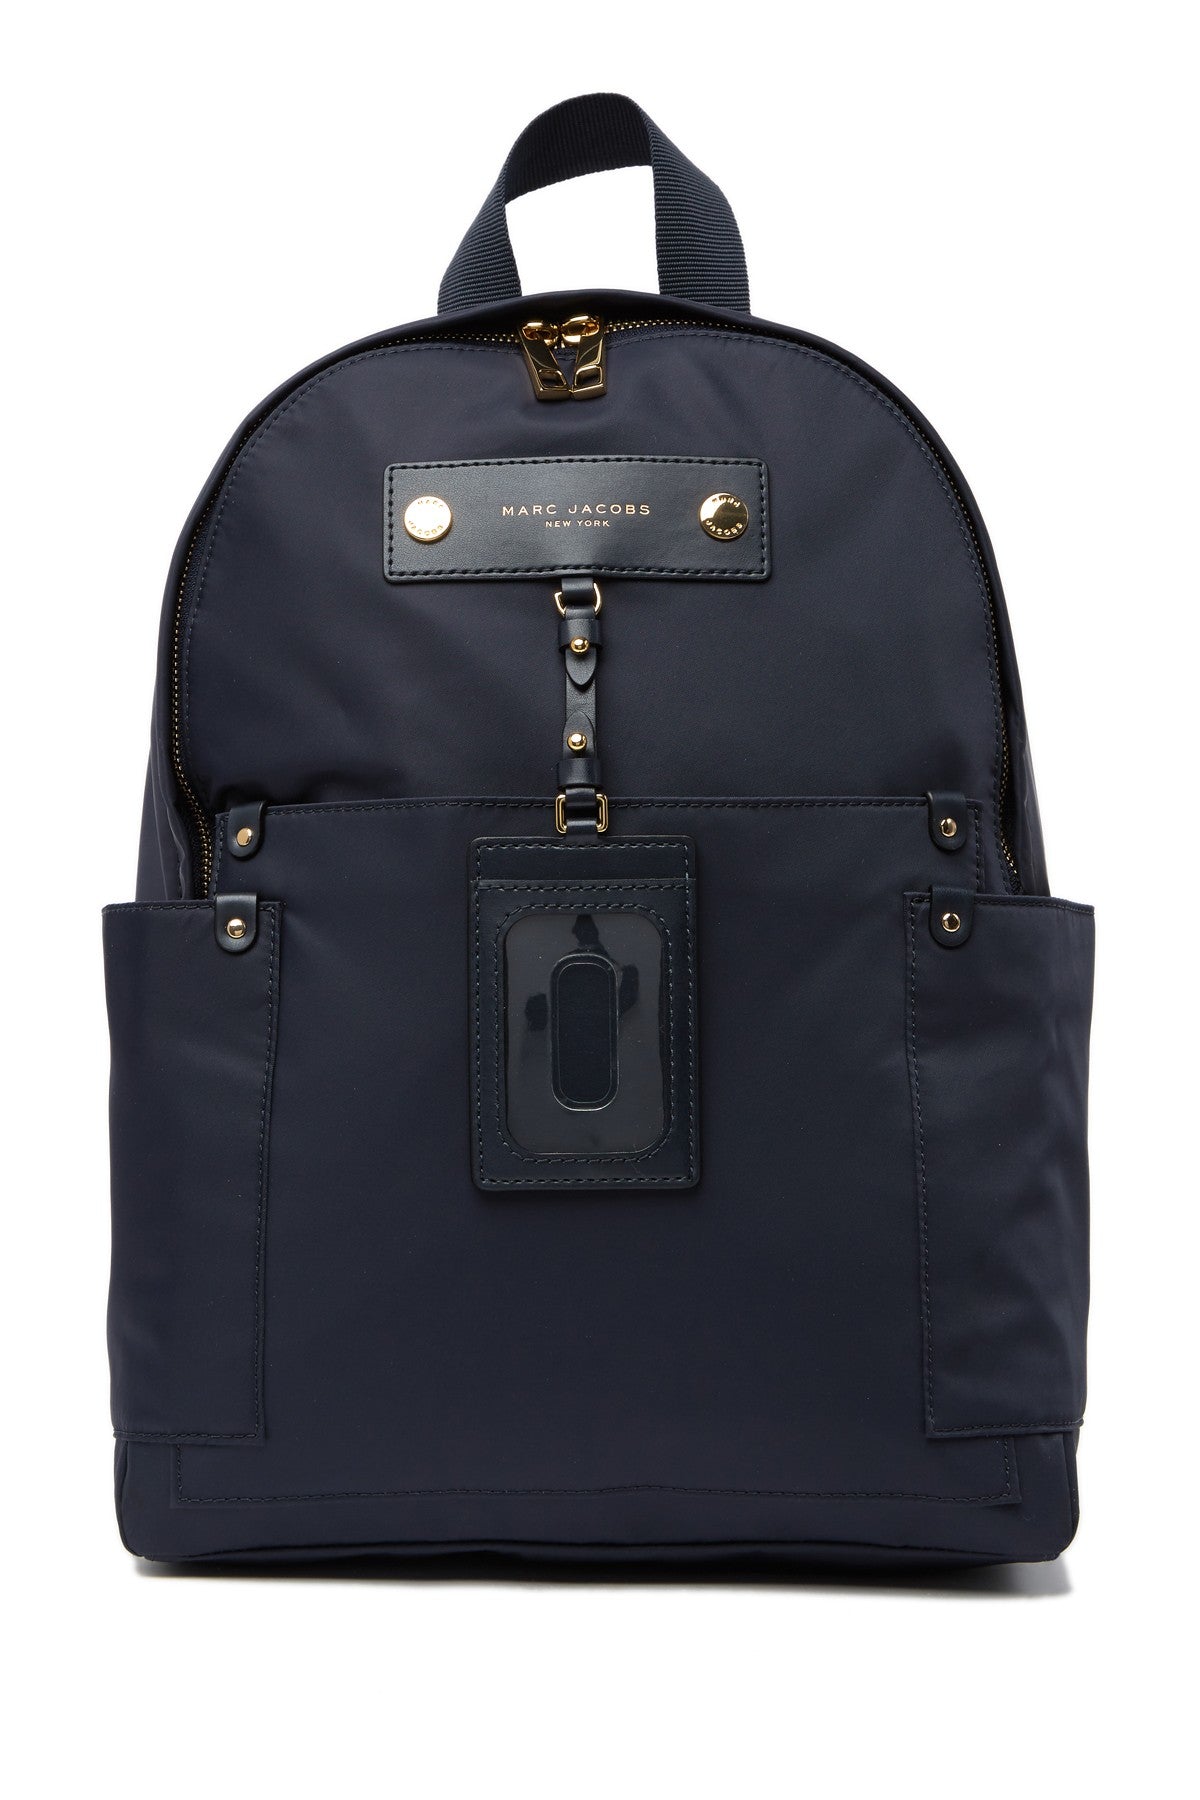 The Marc Jacobs Backpack: Stylish and Affordable —